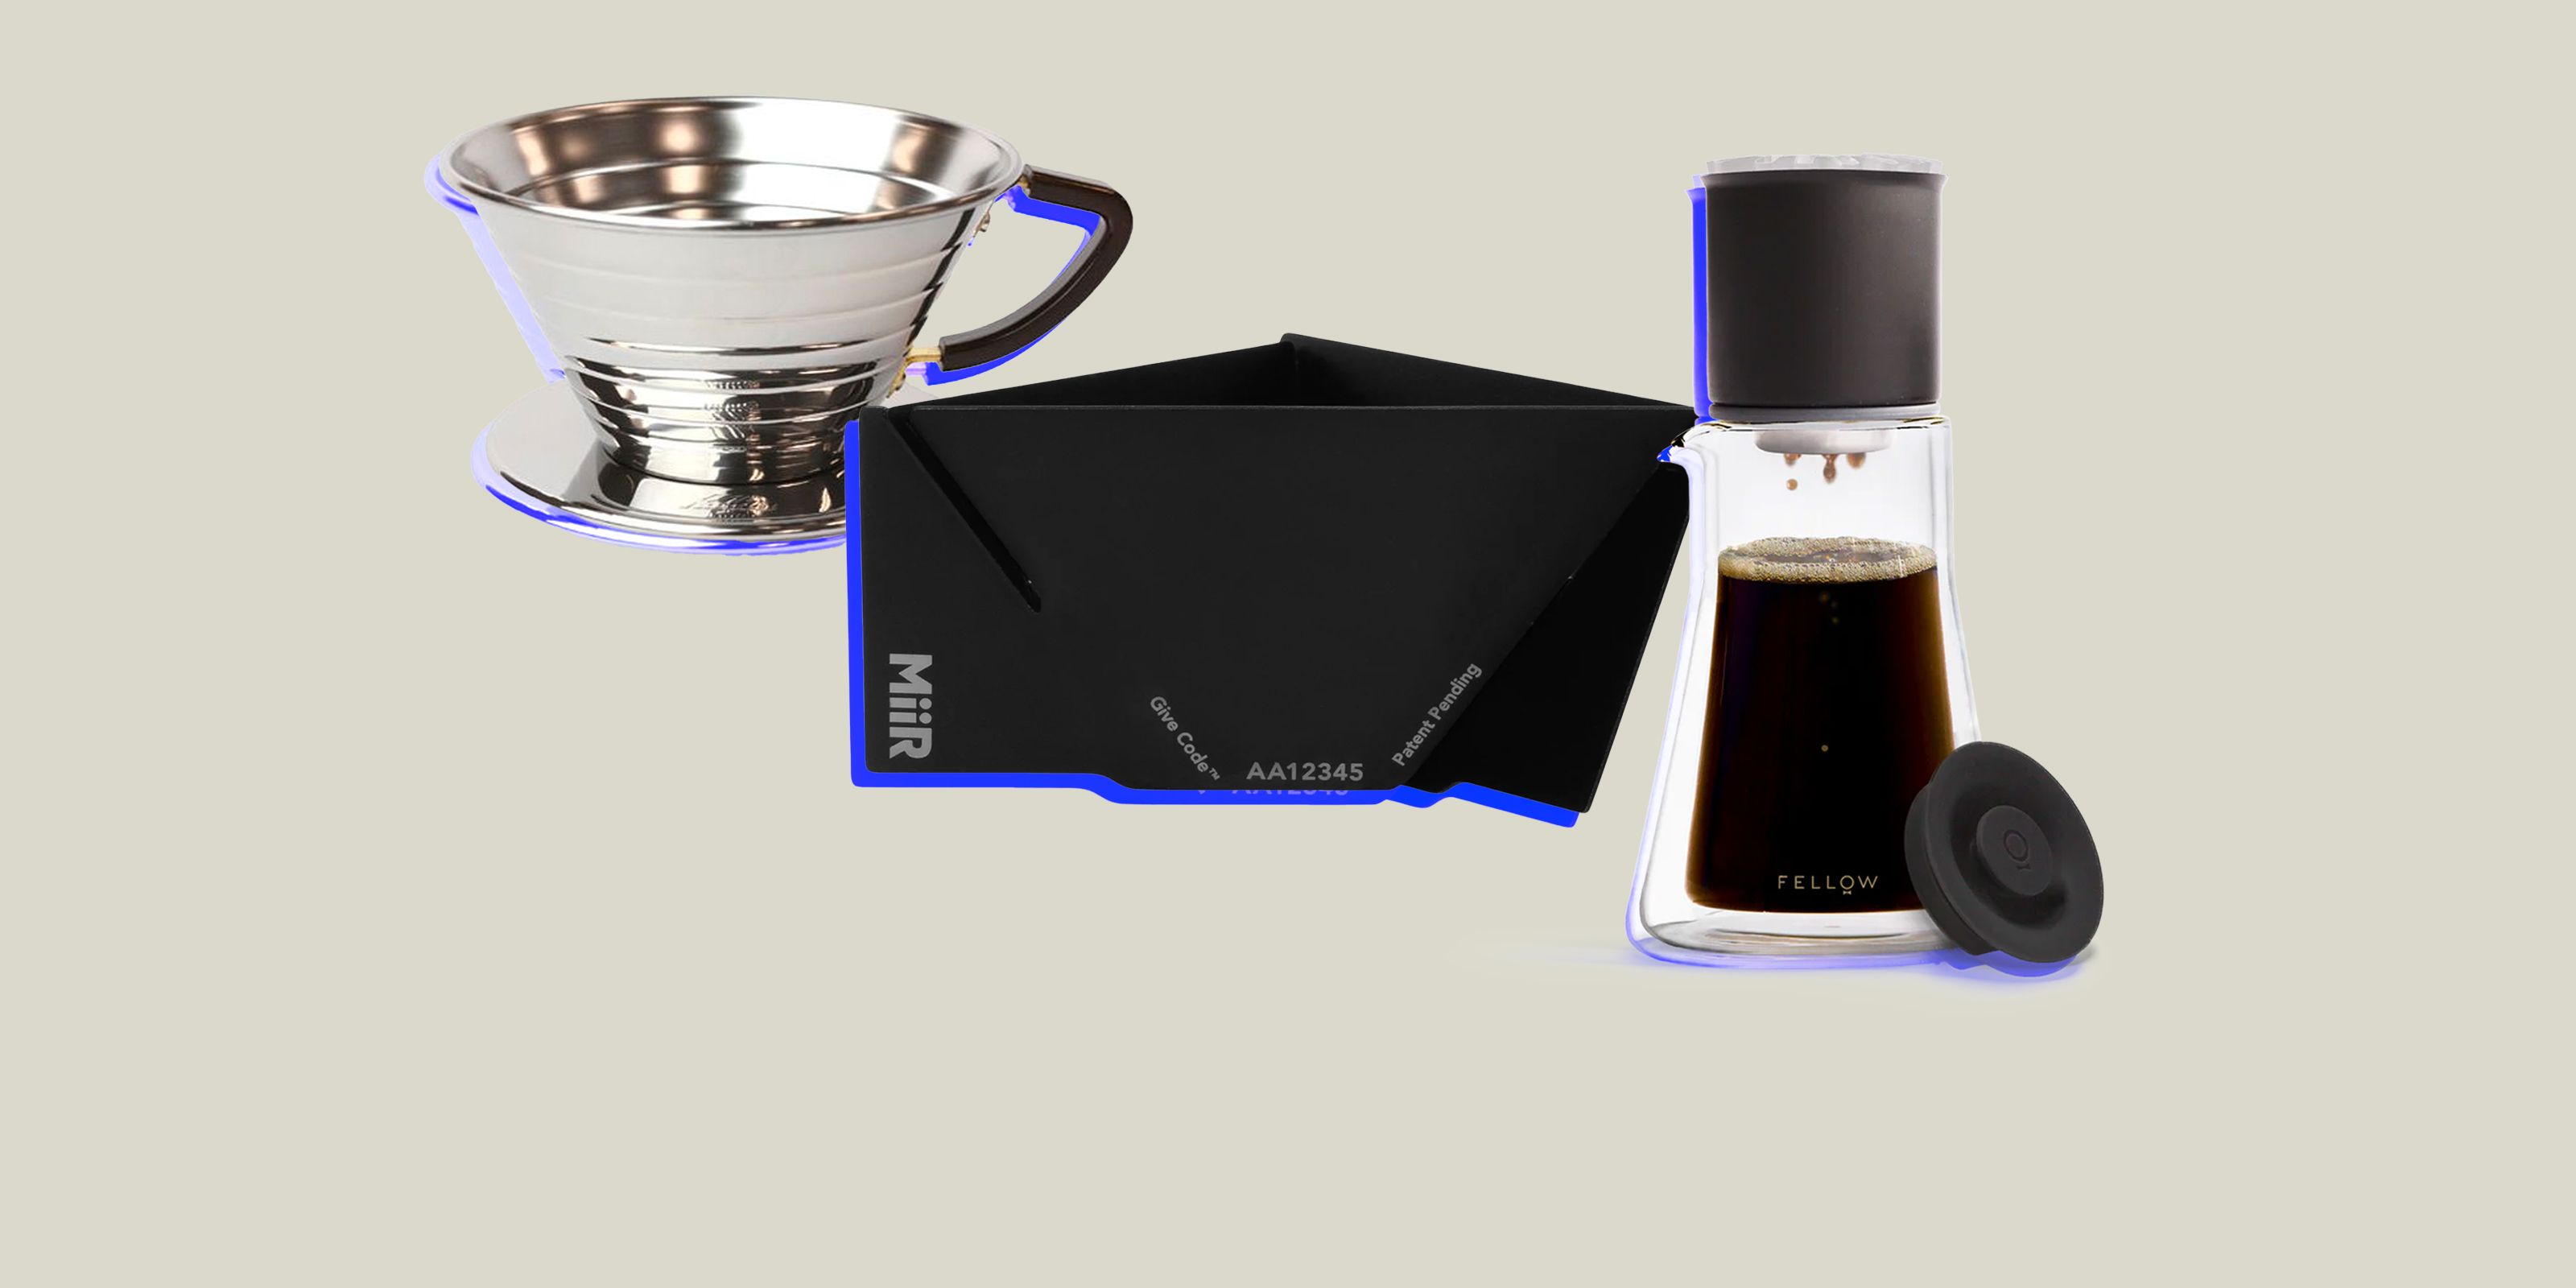 Pour-Over Coffee Equipment - Our Recommended Brew Gear